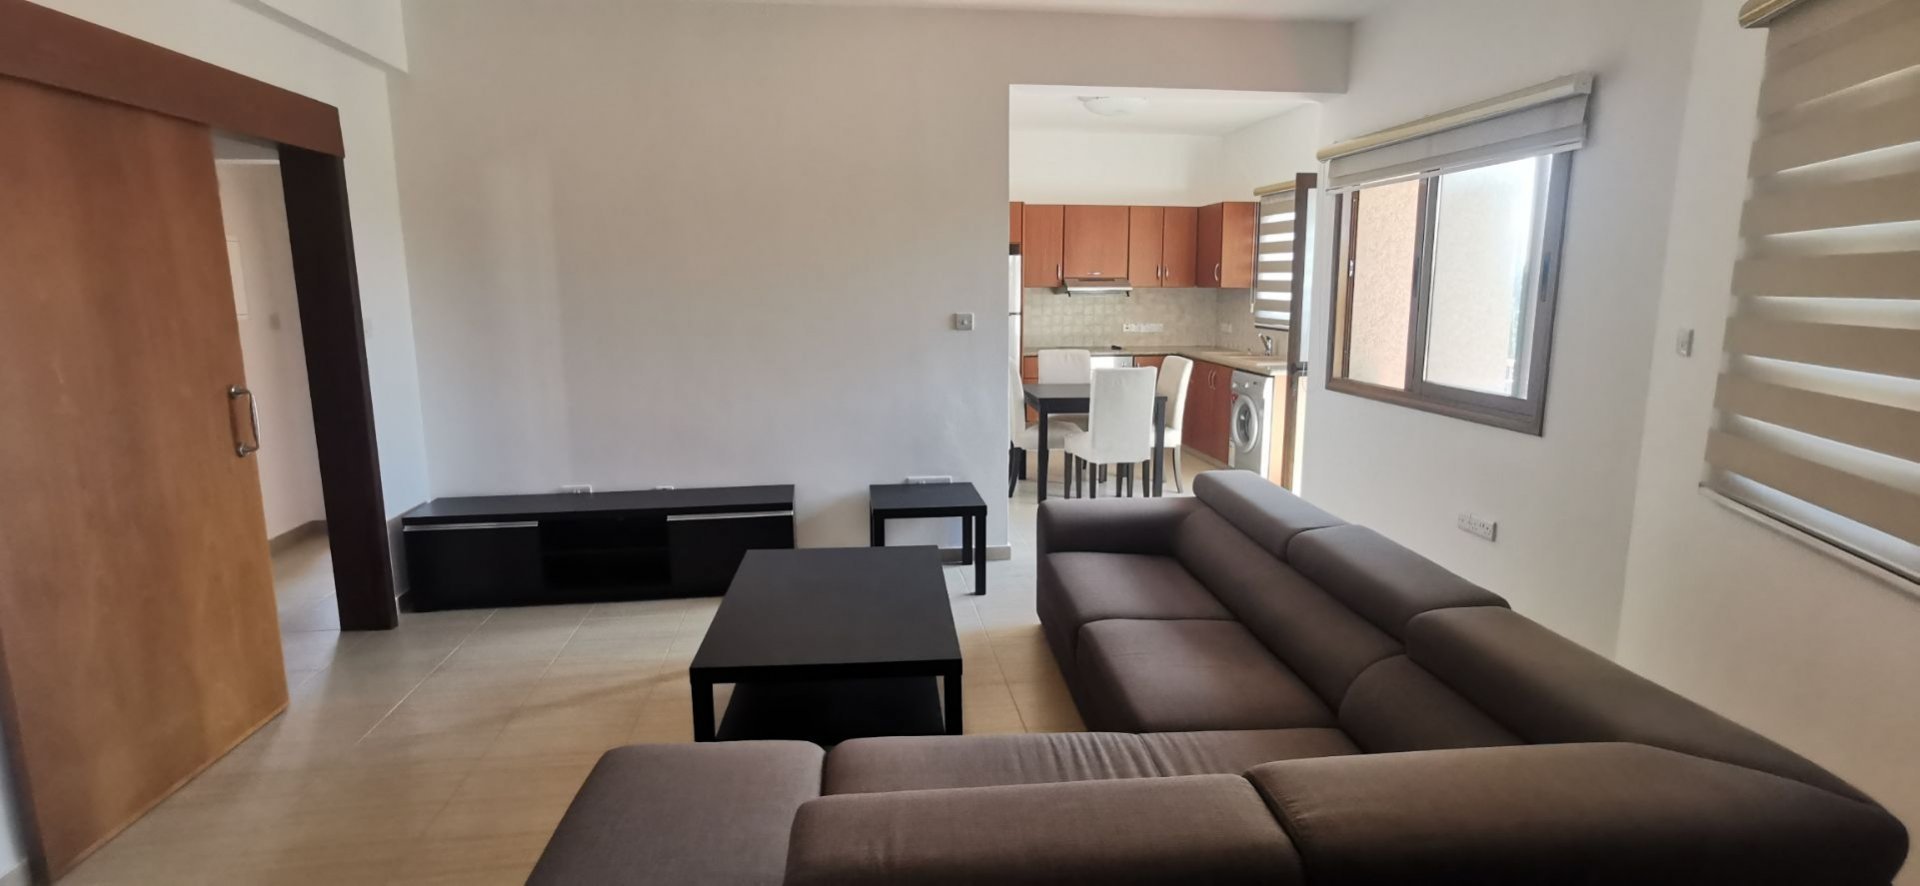 3 Bedroom Apartment for Sale in Kolossi, Limassol District